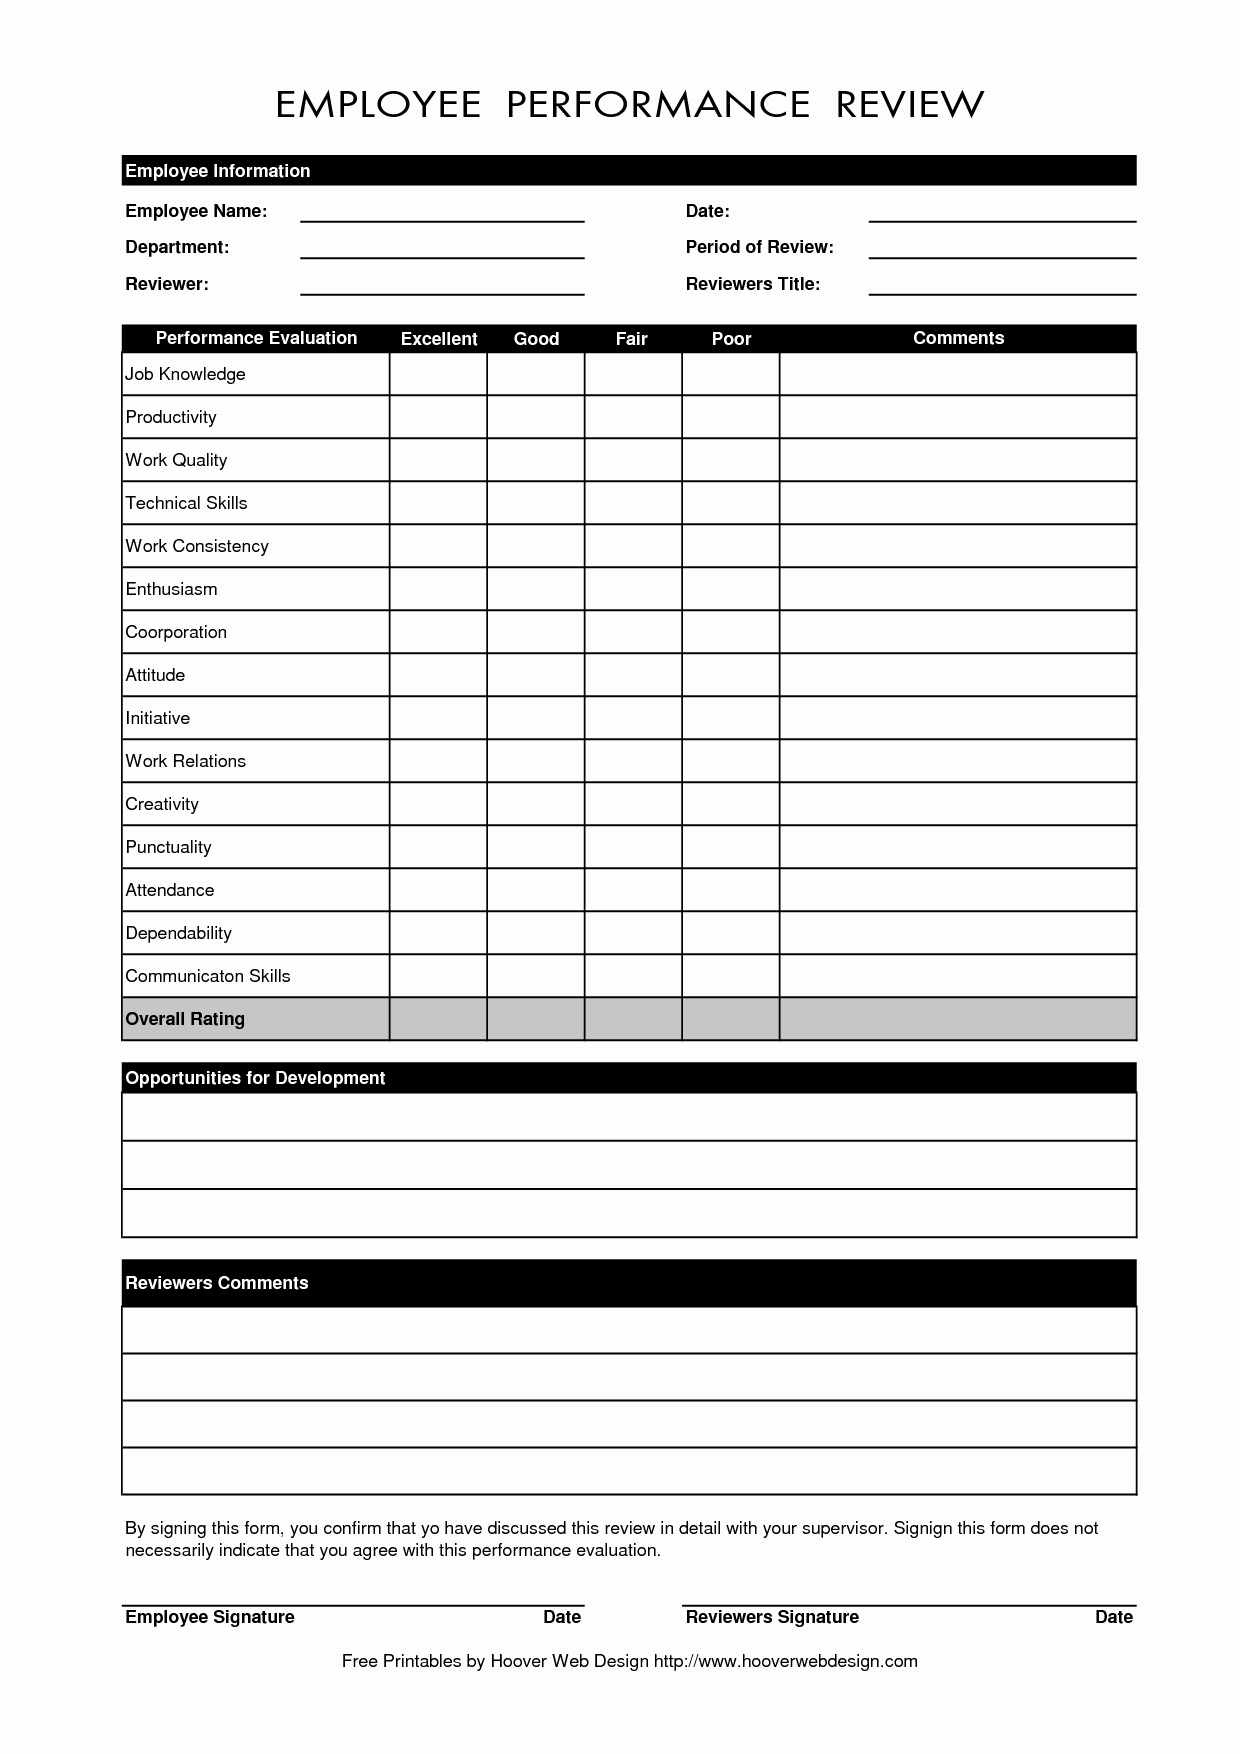 Evaluation form Template Free Awesome Free Employee Performance Evaluation form Template